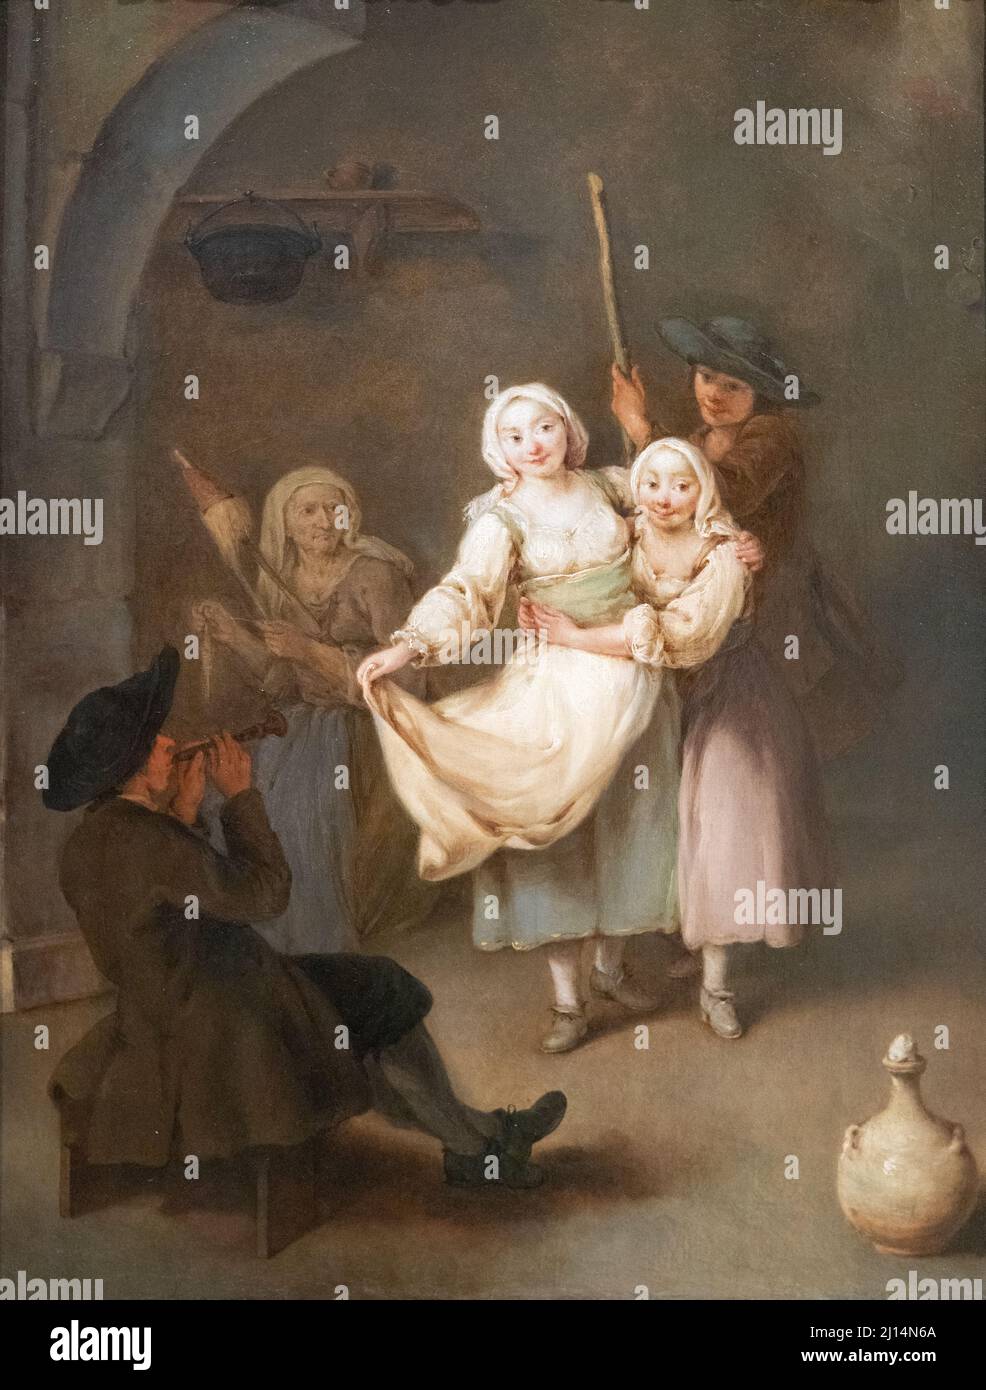 Pietro Longhi painting, 'The Dance' 1750, 18th century Italian old master, oil on canvas Stock Photo